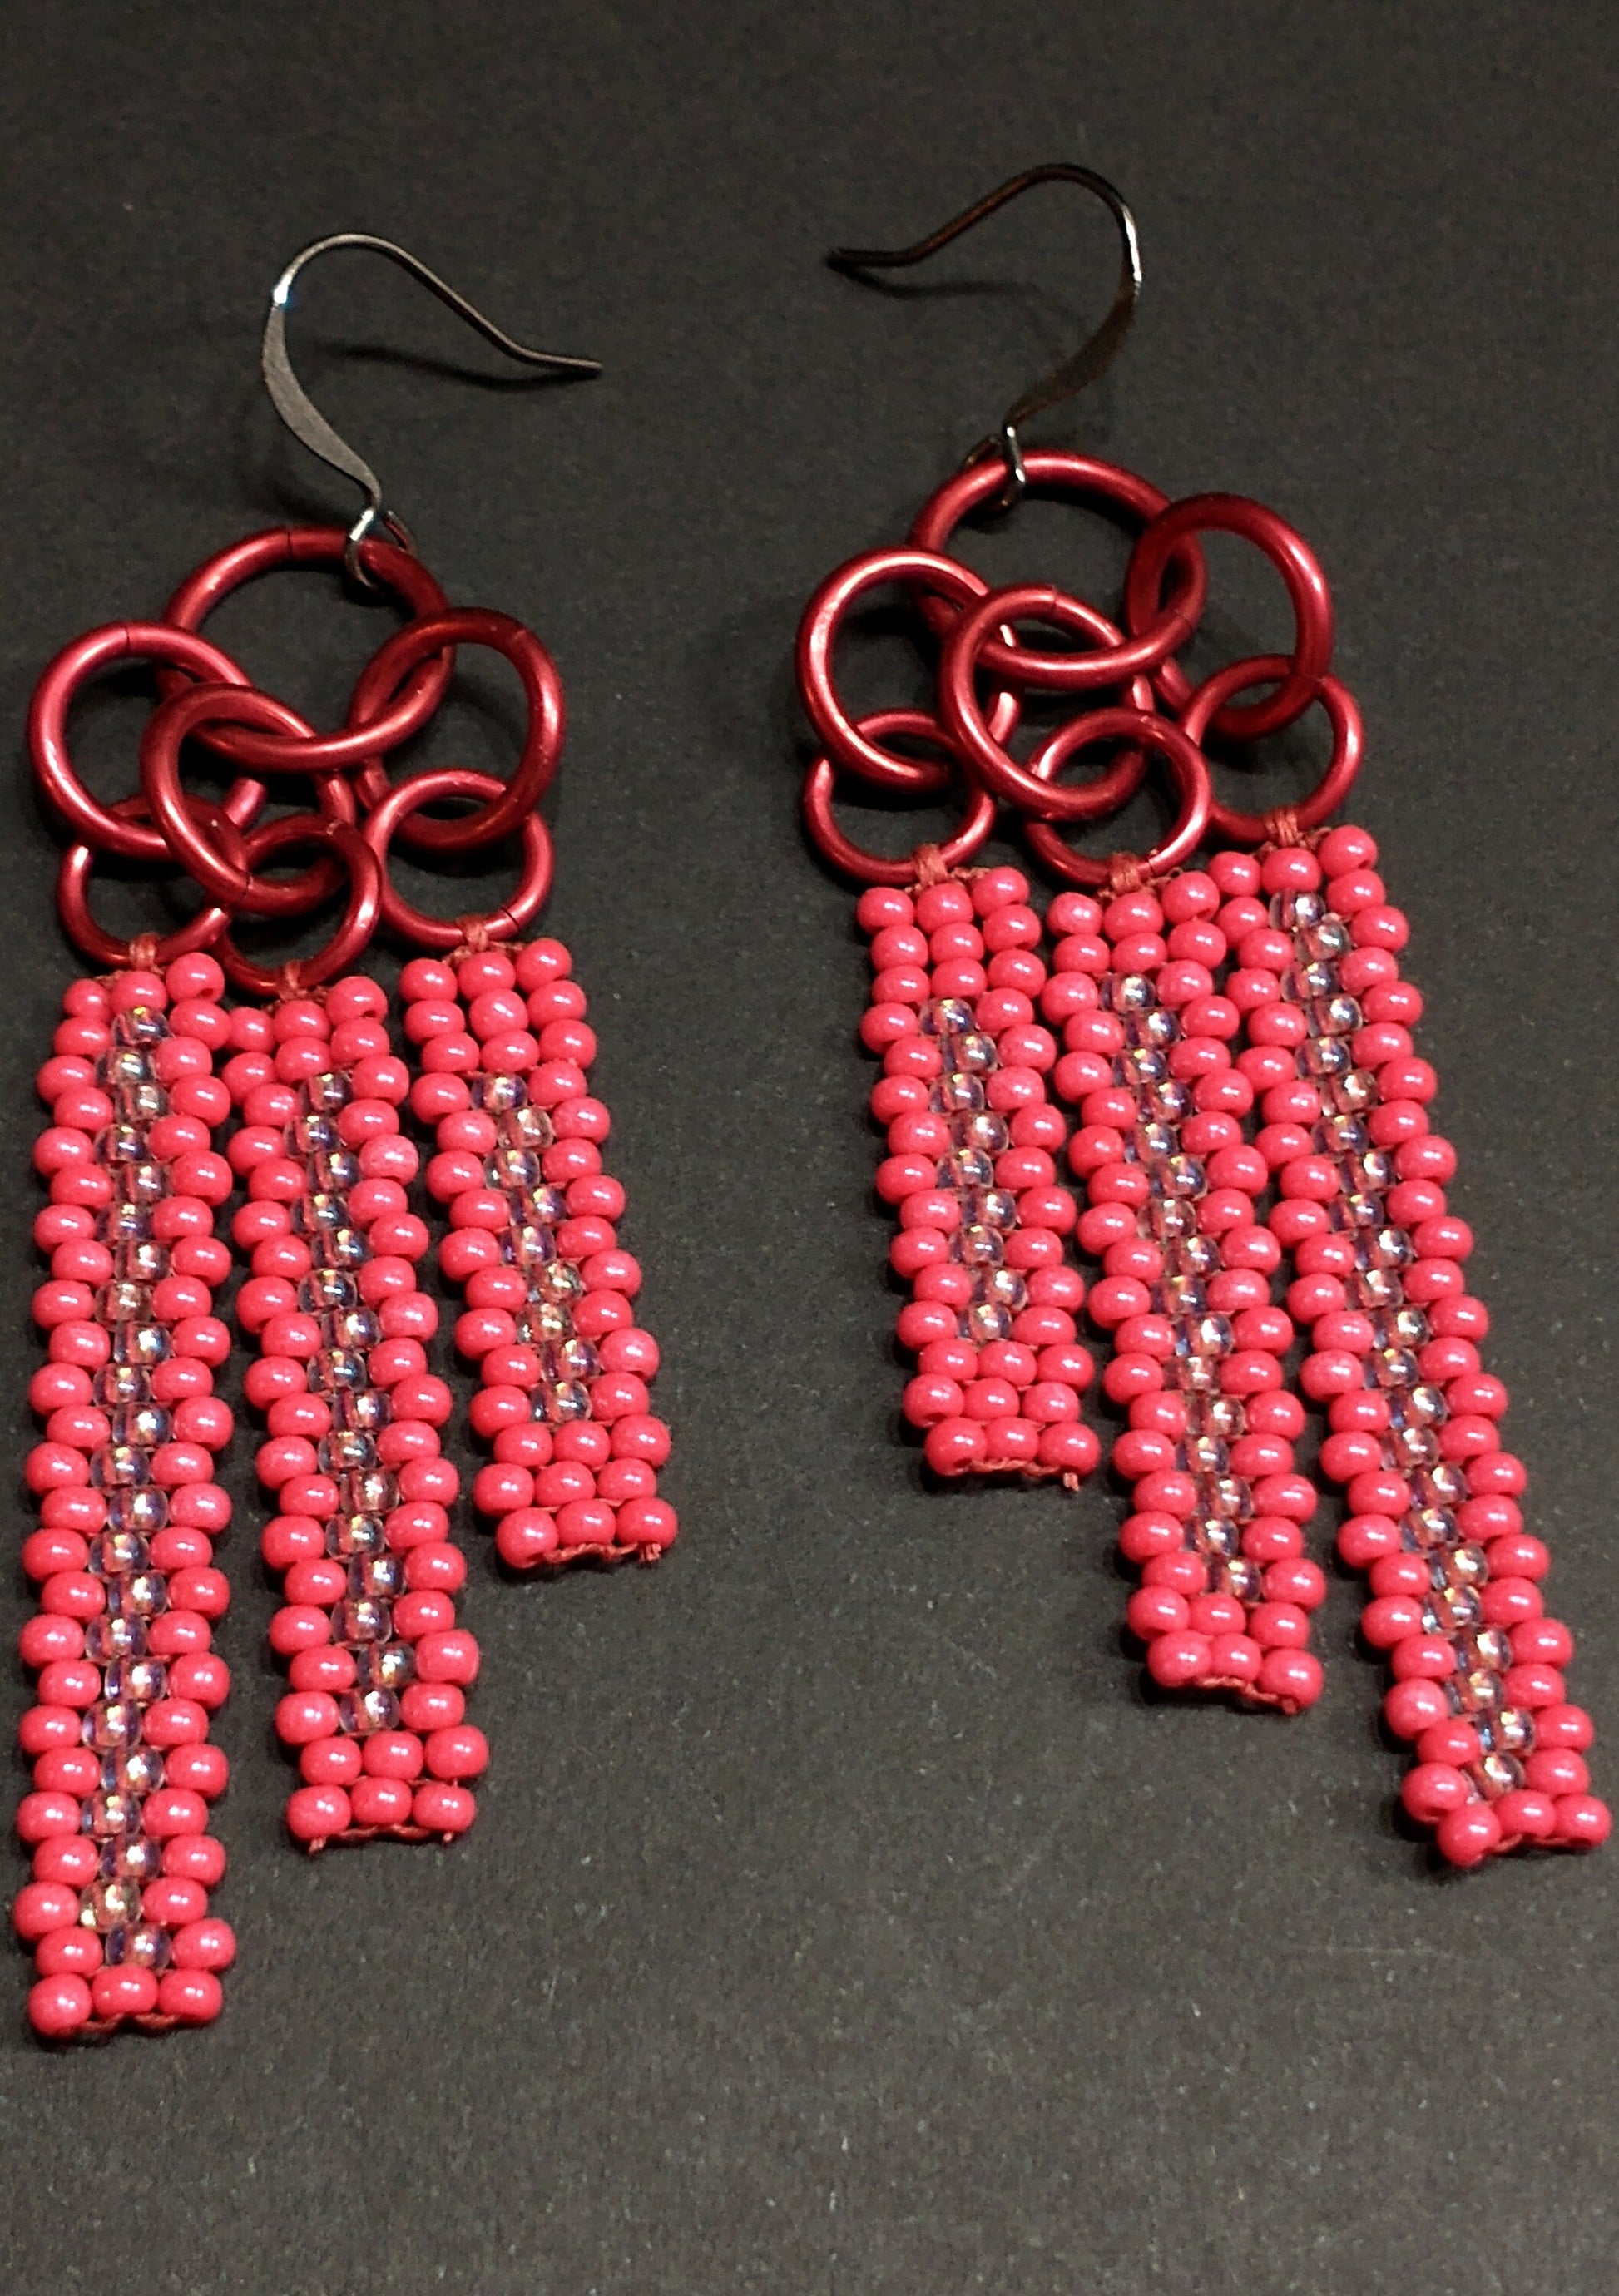 Tiered Red Beaded Earrings | Seed Bead Geometric Fringe | Colorful Woven Dangles | Handwoven Native Beadwork | Chic Bohemian Jewelry |